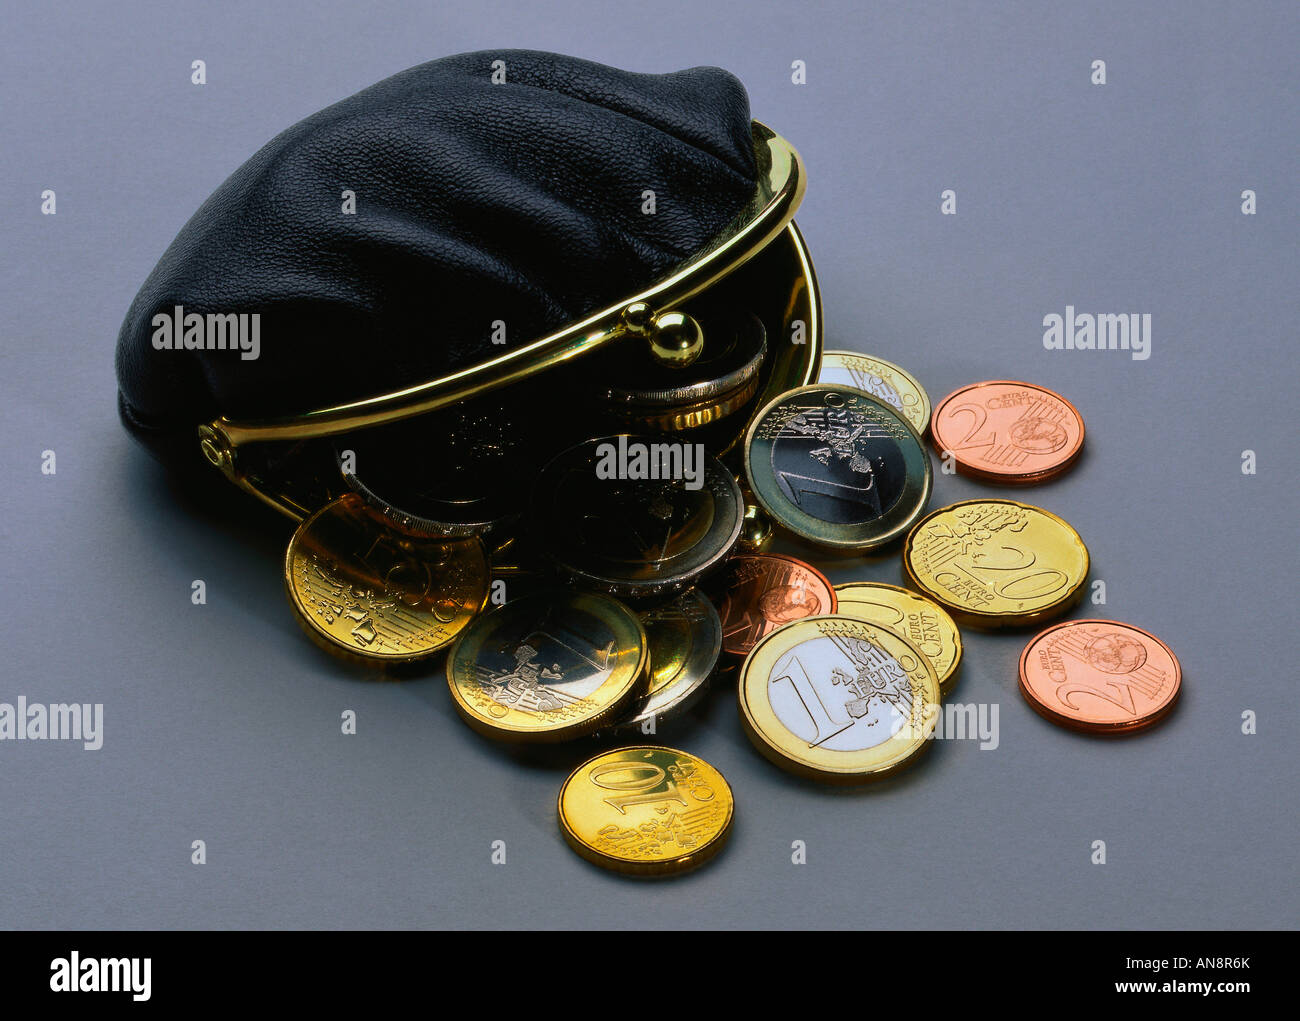 Purse with euroopean coins Stock Photo